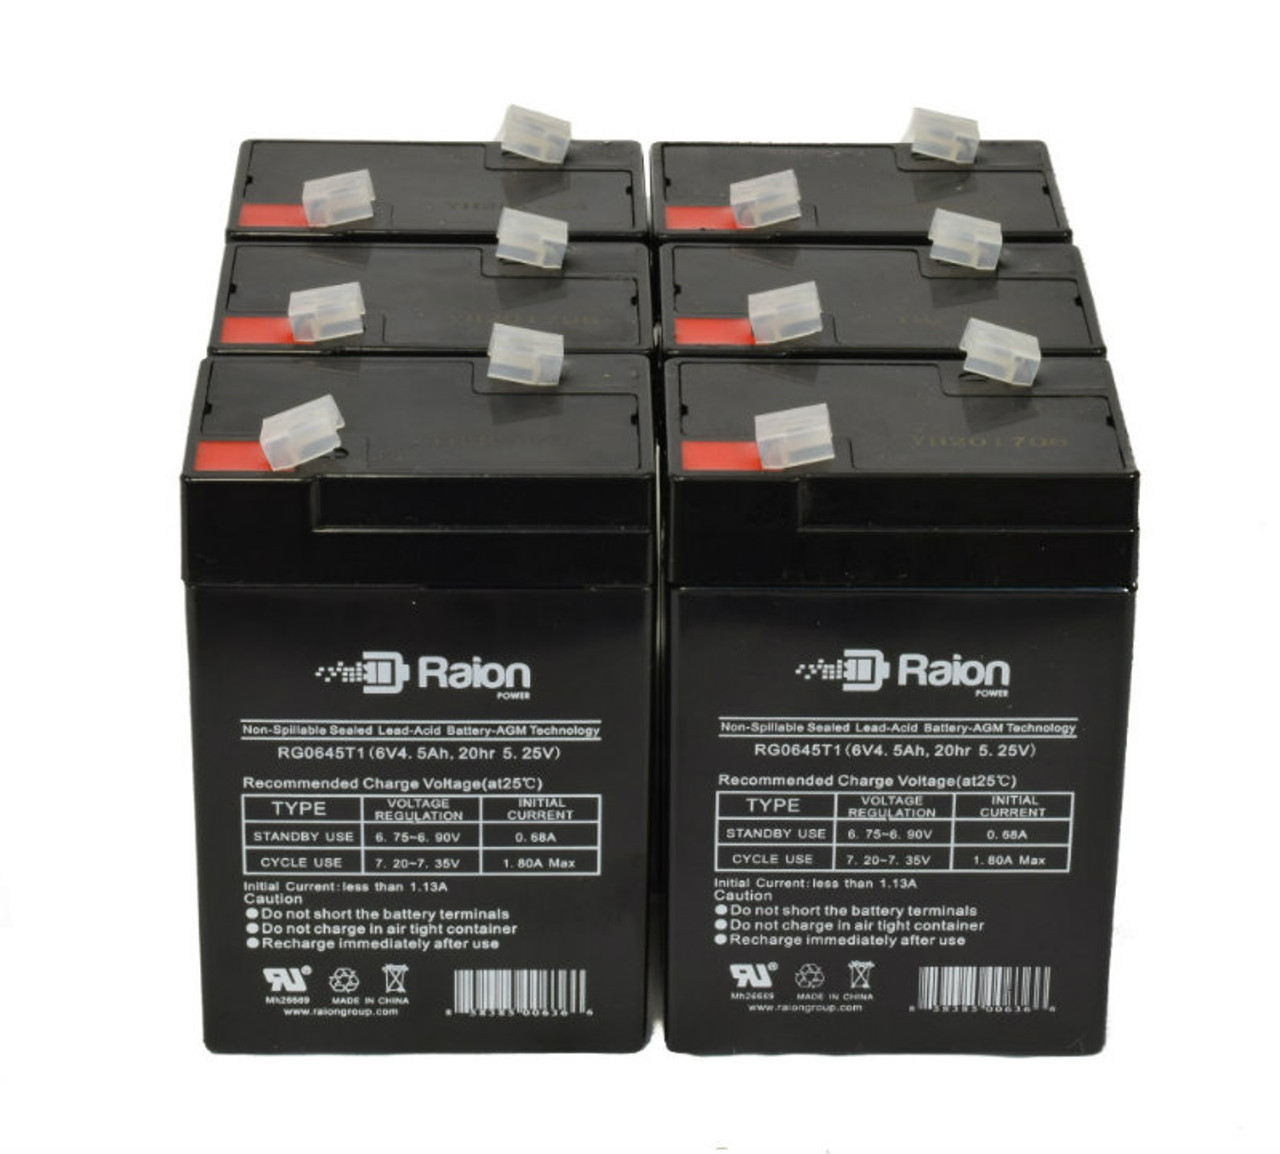 Raion Power RG0645T1 6V 4.5Ah Replacement Medical Equipment Battery for Alaris Medical 821 Intell Pump - 6 Pack